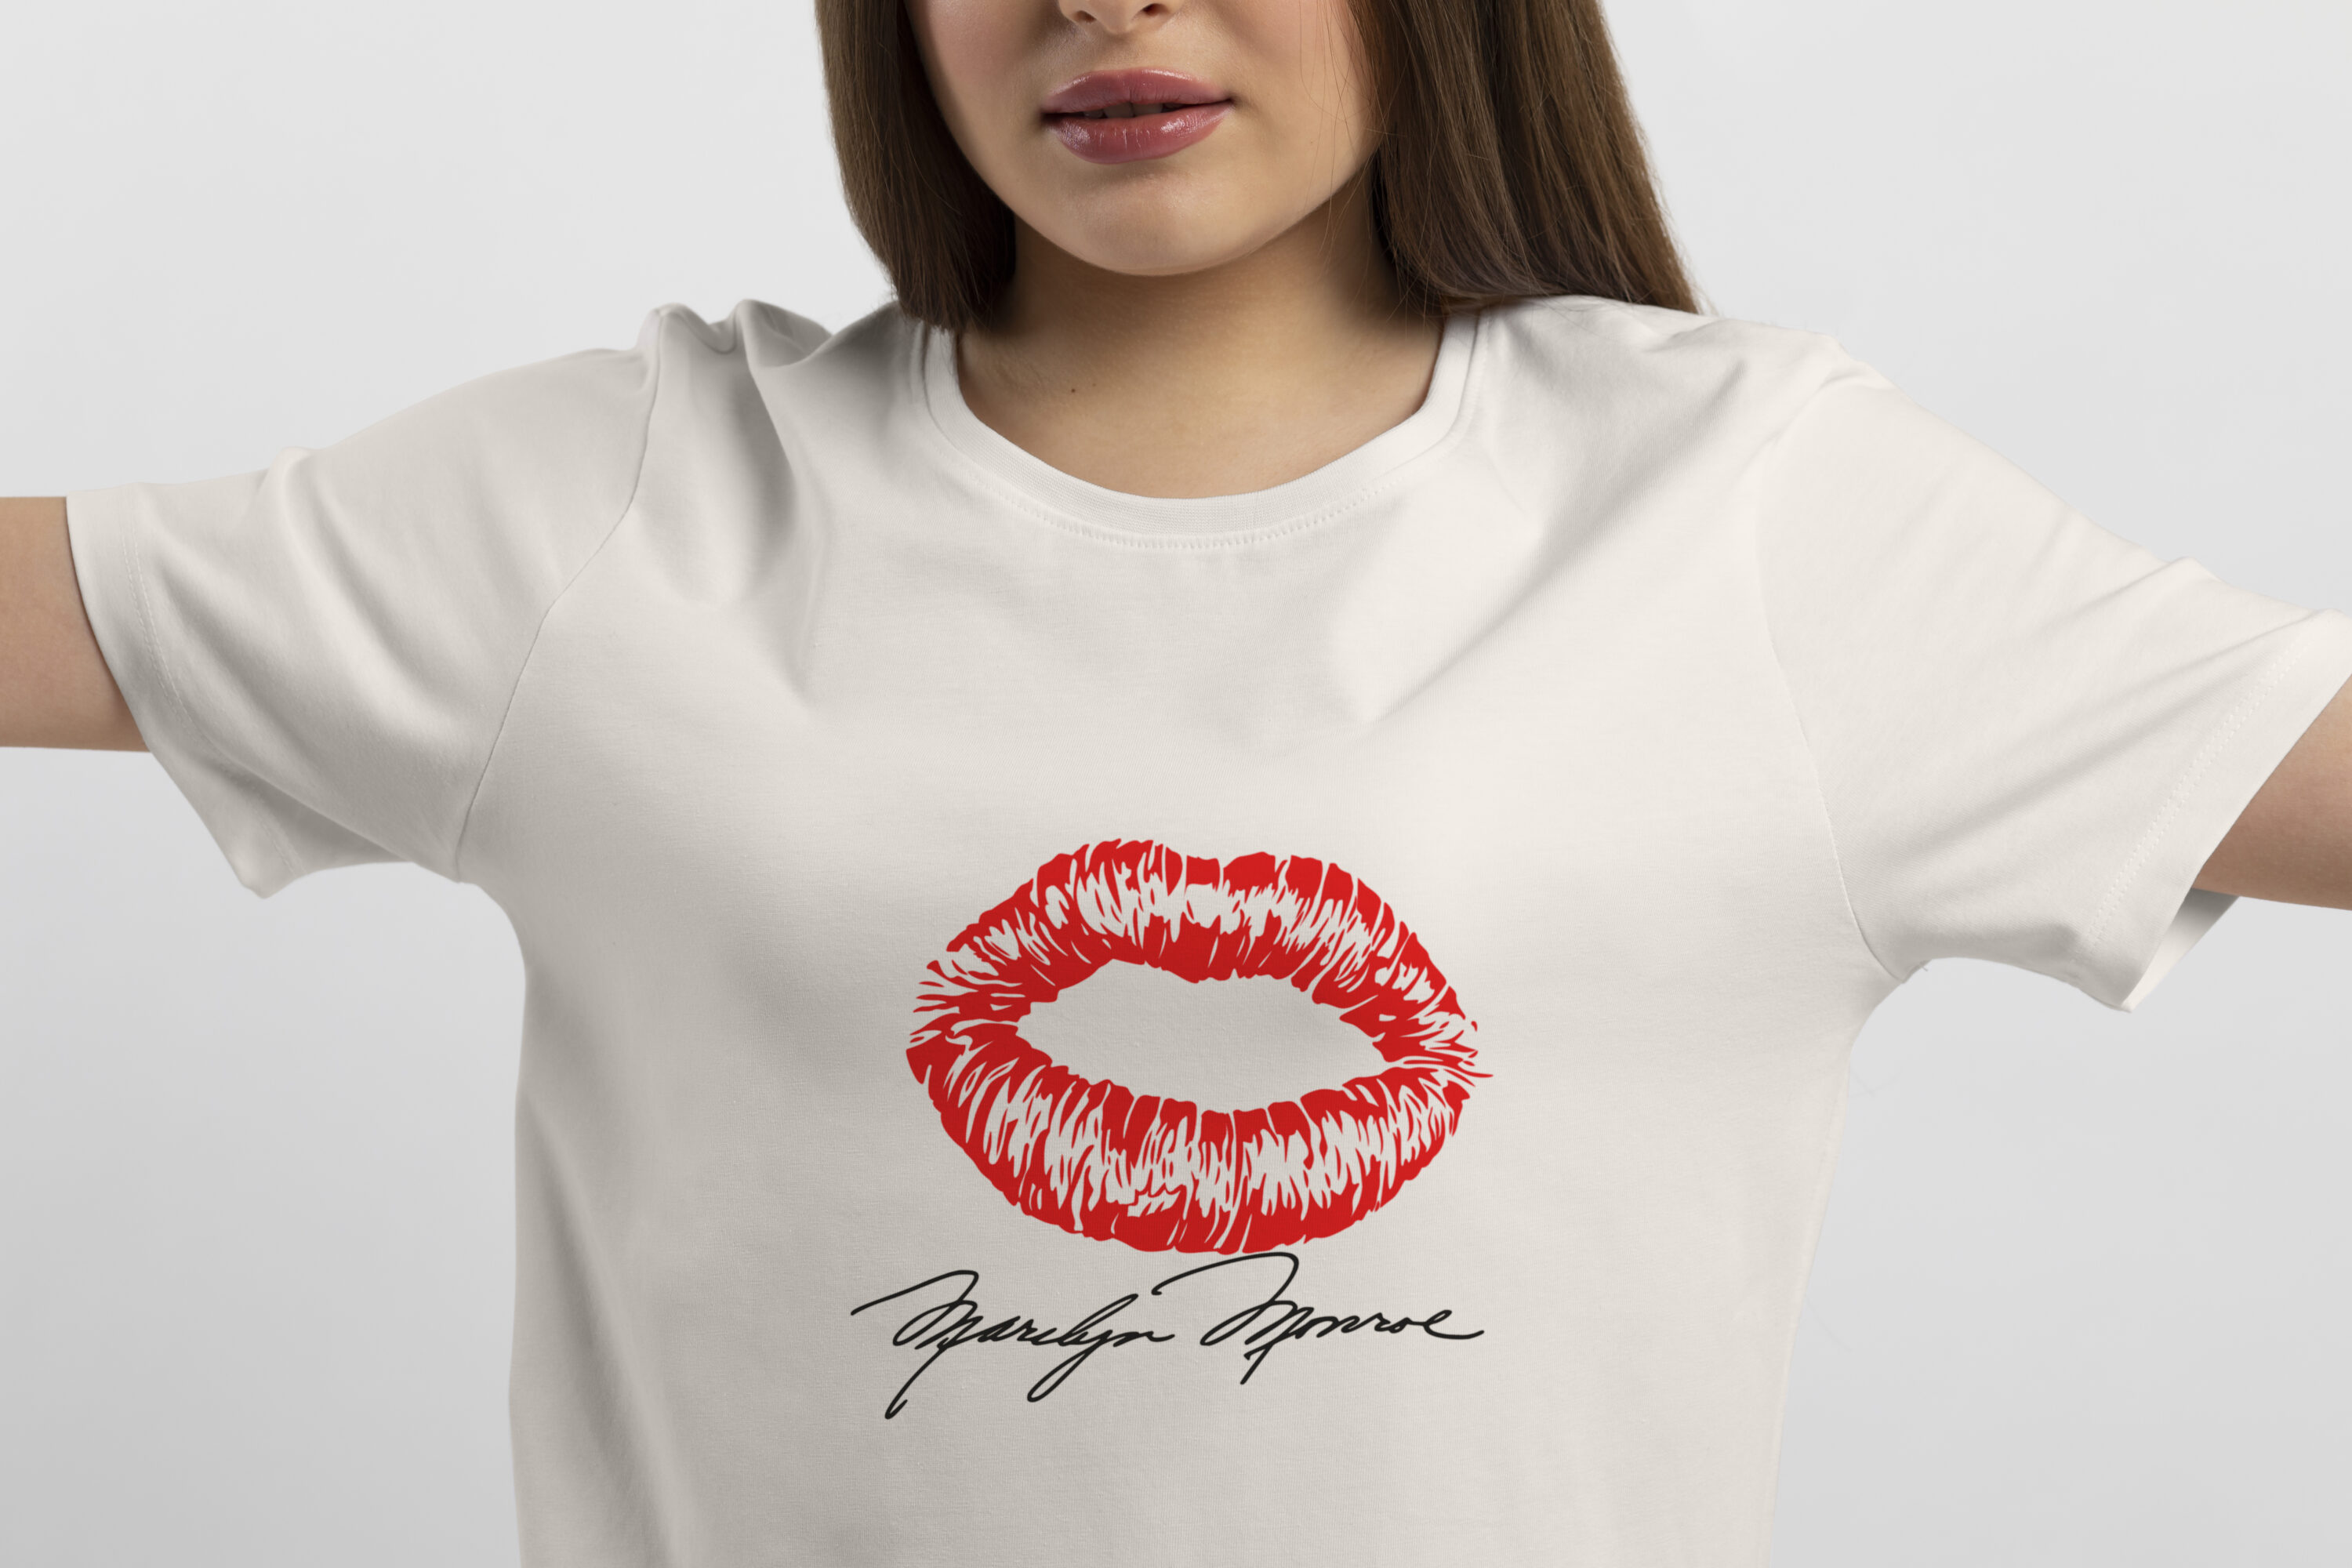 mage of a white t-shirt with an adorable print of Marilyn Monroe's signature and her lips imprint.